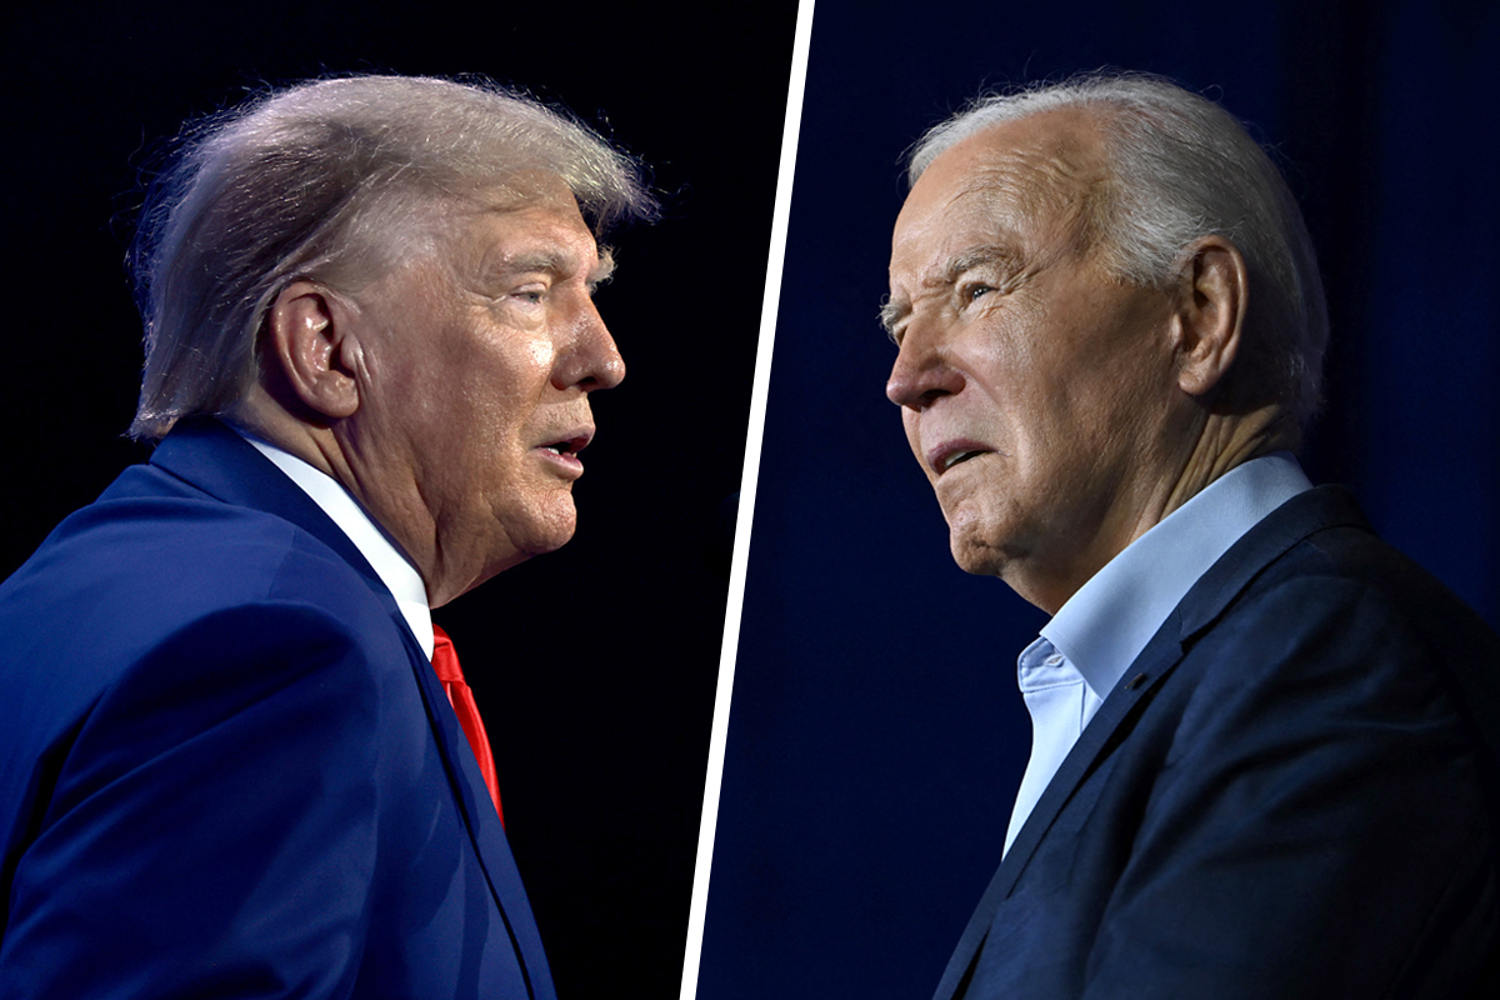 Poll: Election interest hits new low in tight Biden-Trump race